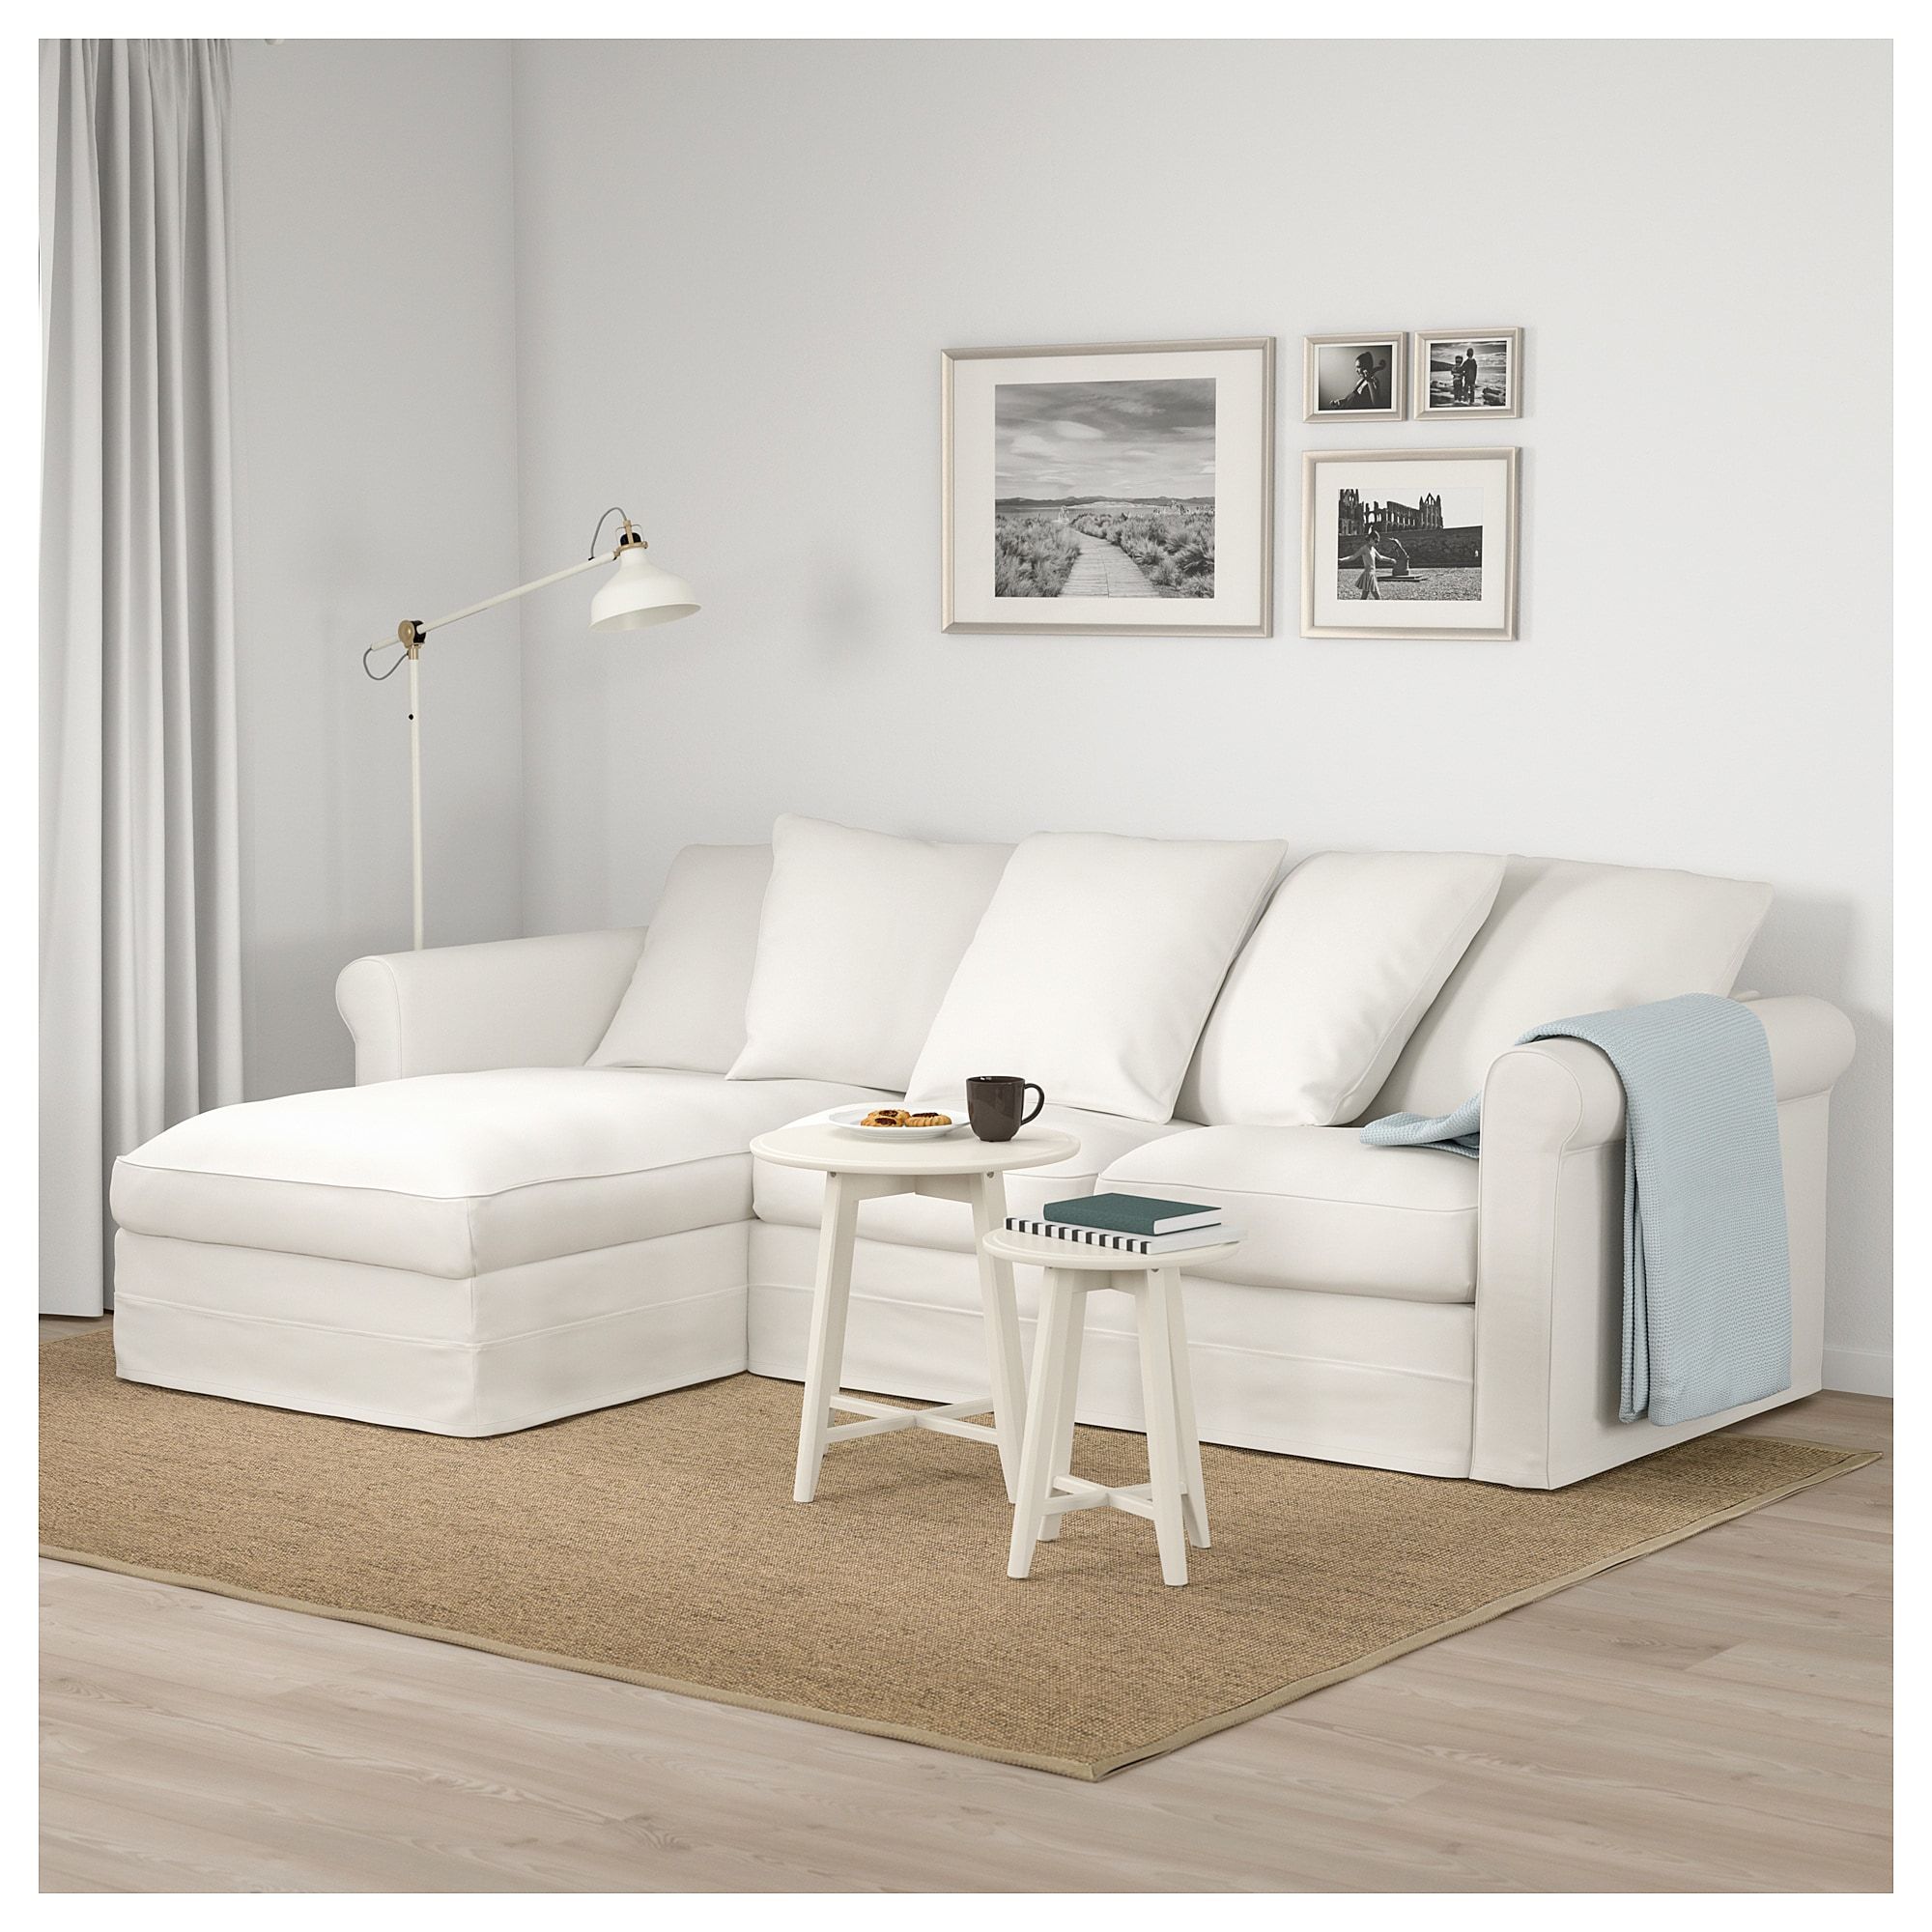 GRNLID Sofa With Storage Chaise